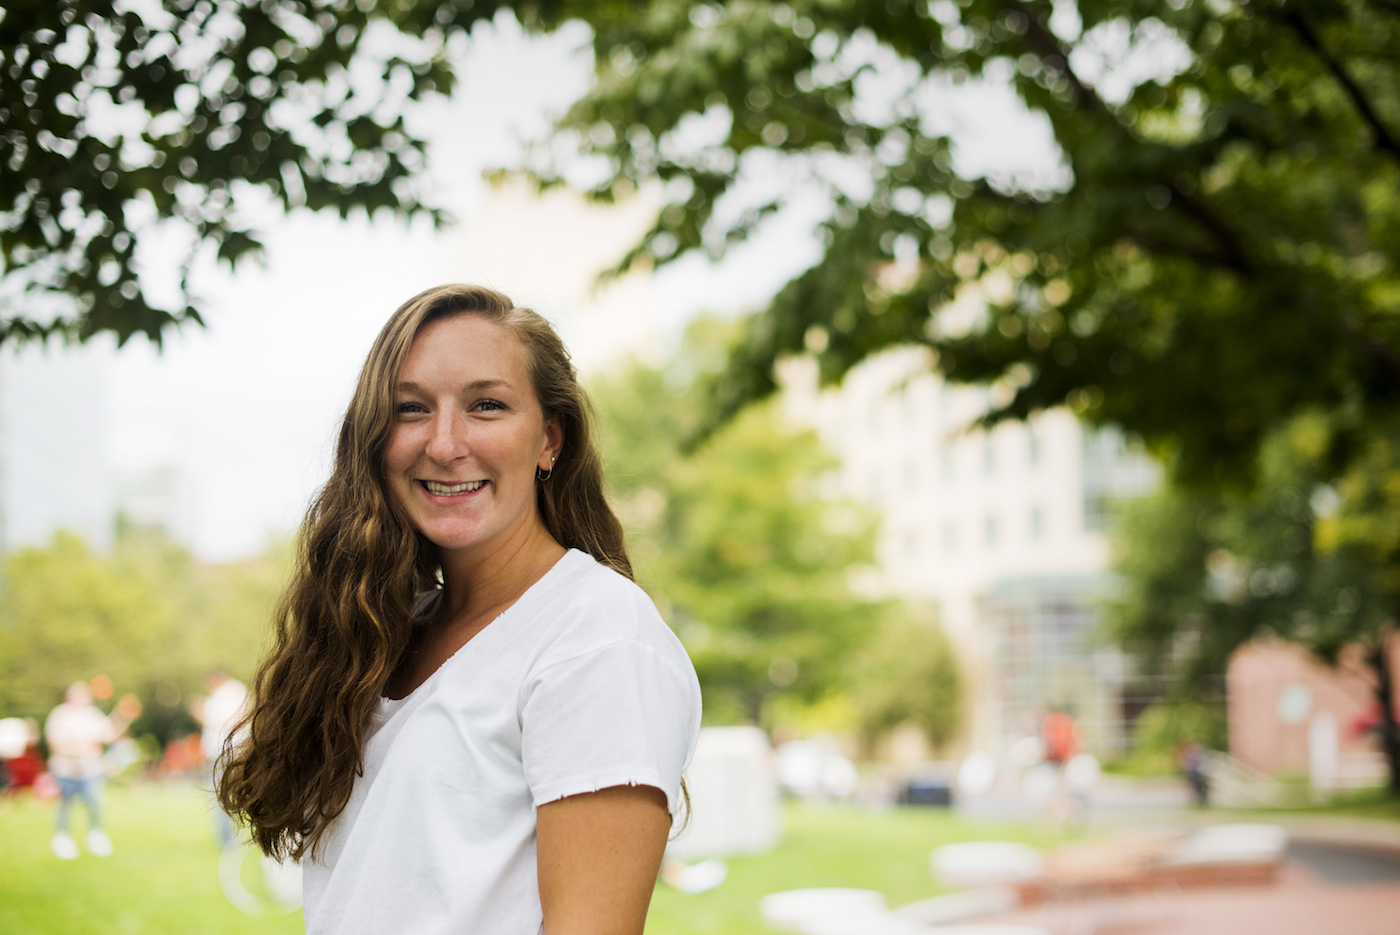 Sarah Binder, S' 21, poses for a portrait on Centennial Common on the first day of class on Sept. 6, 2017.